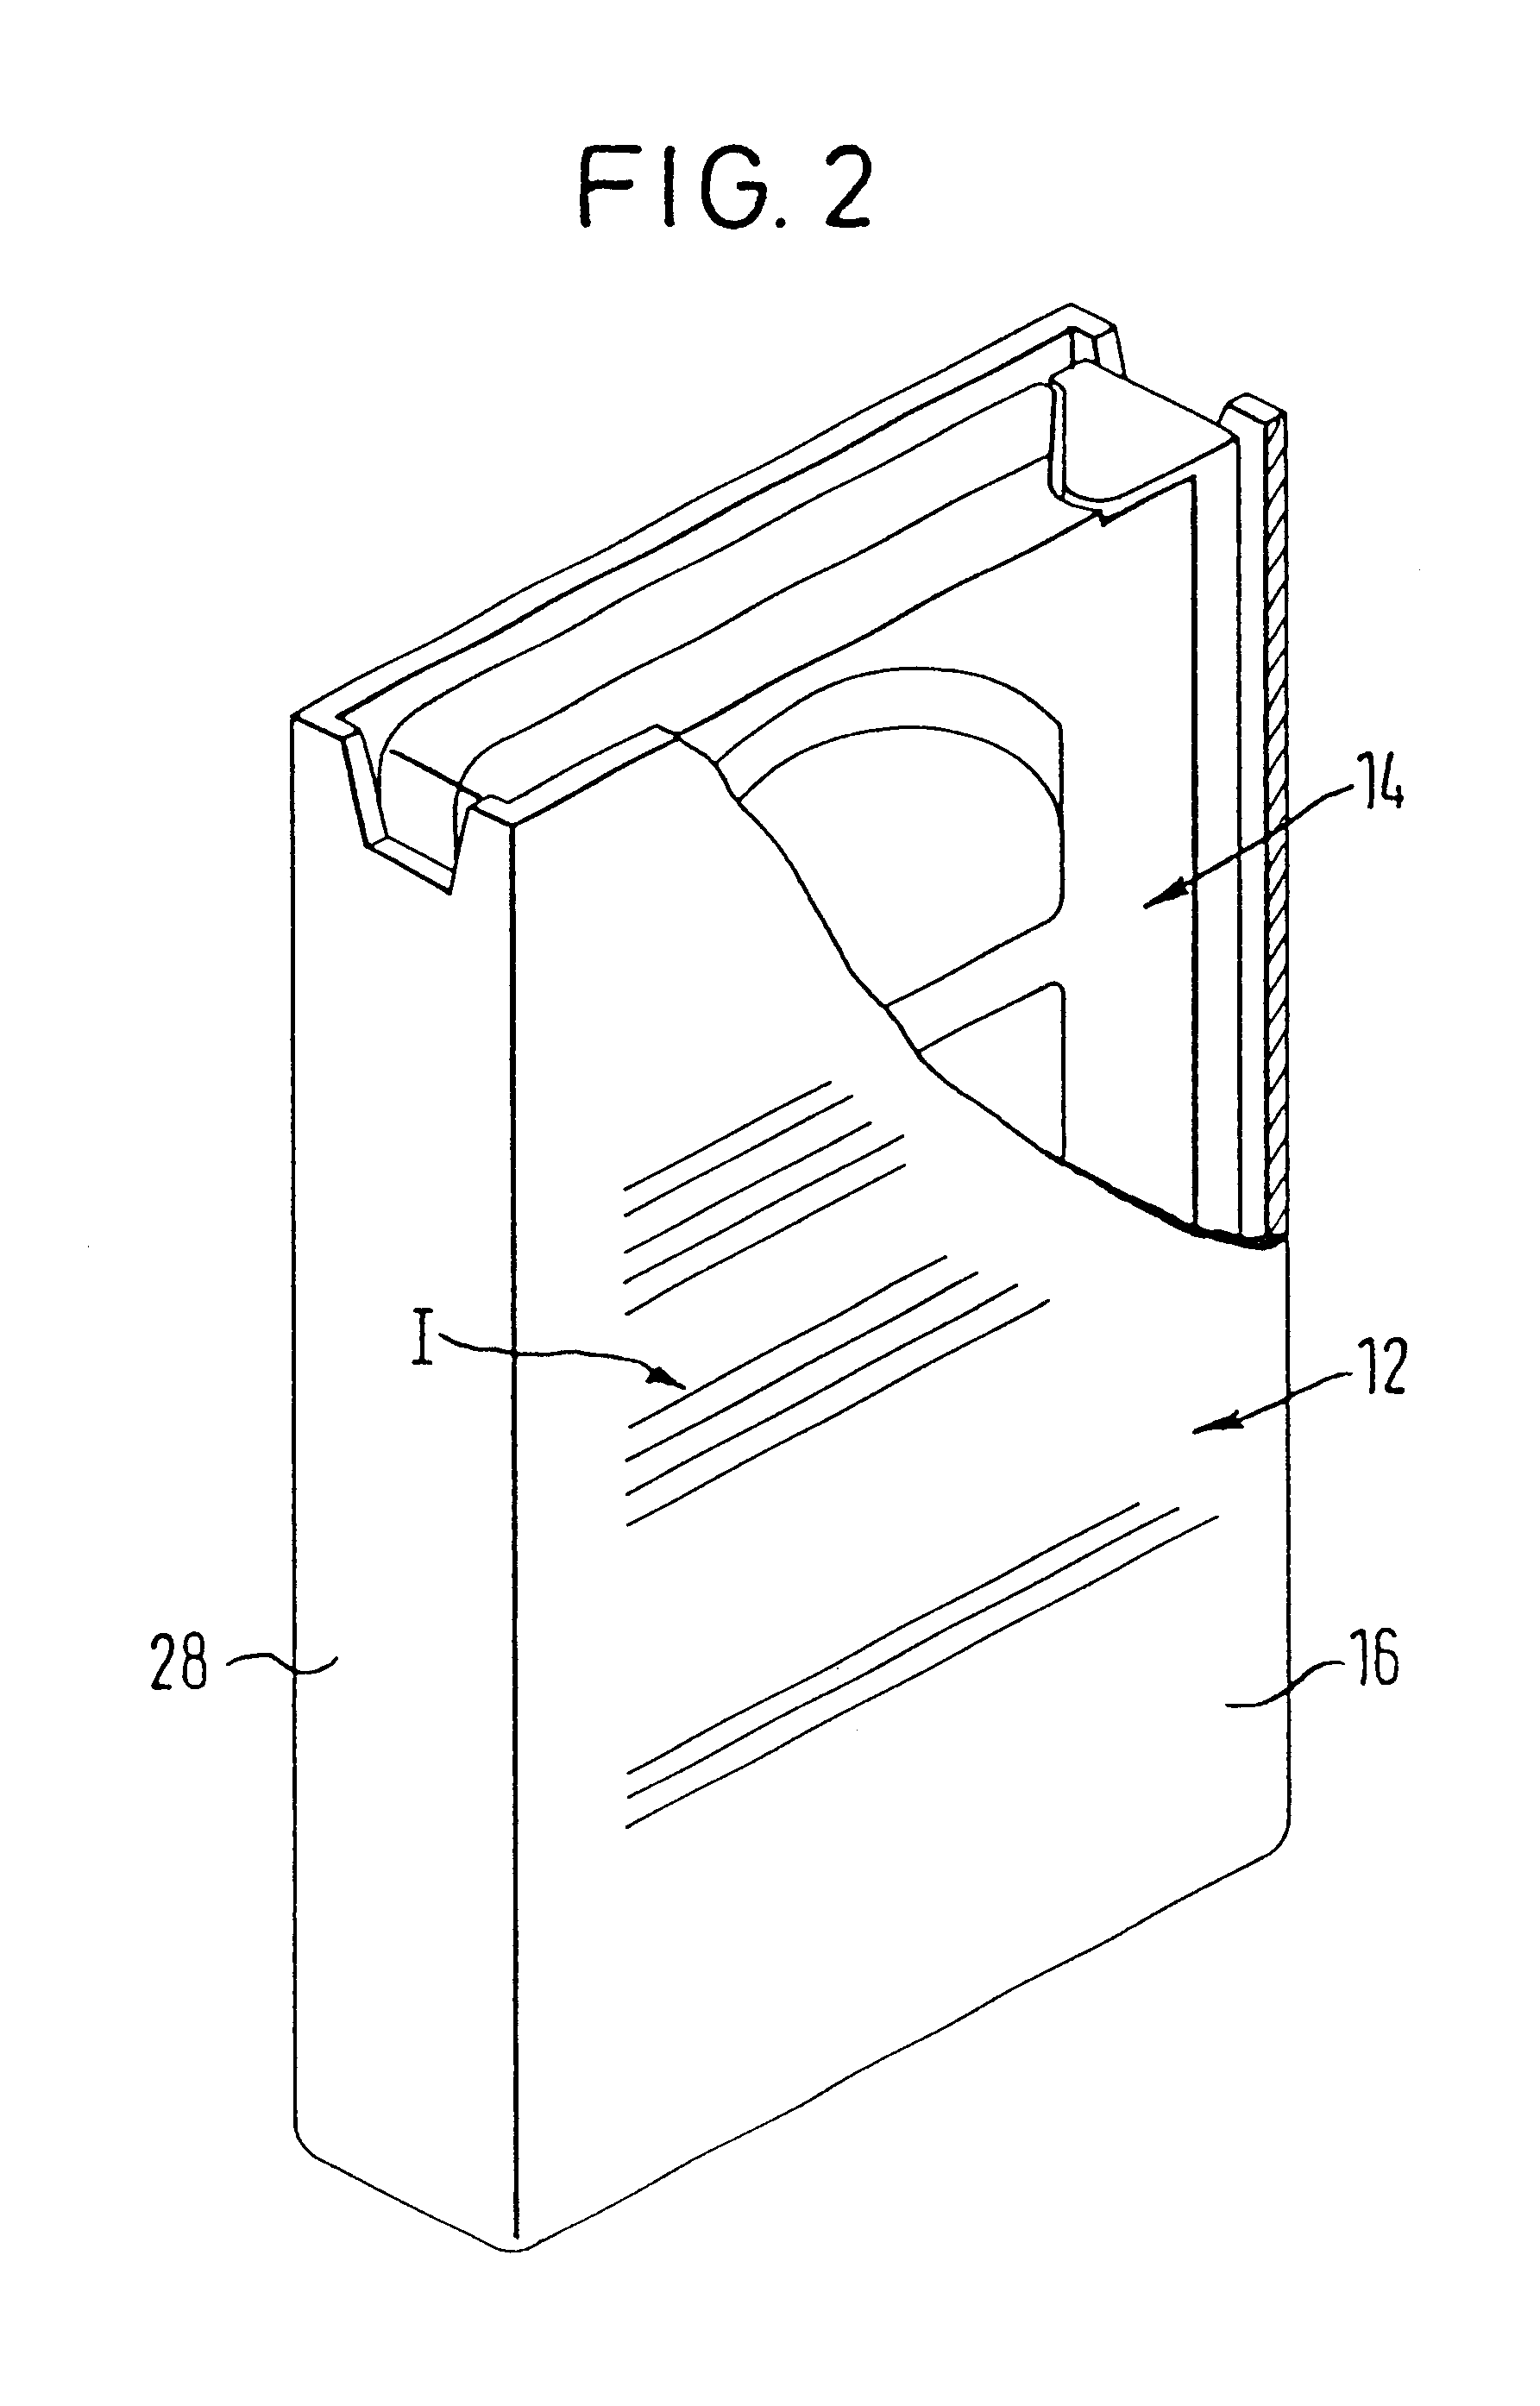 Printable blank of improved durability for forming video cassette boxes